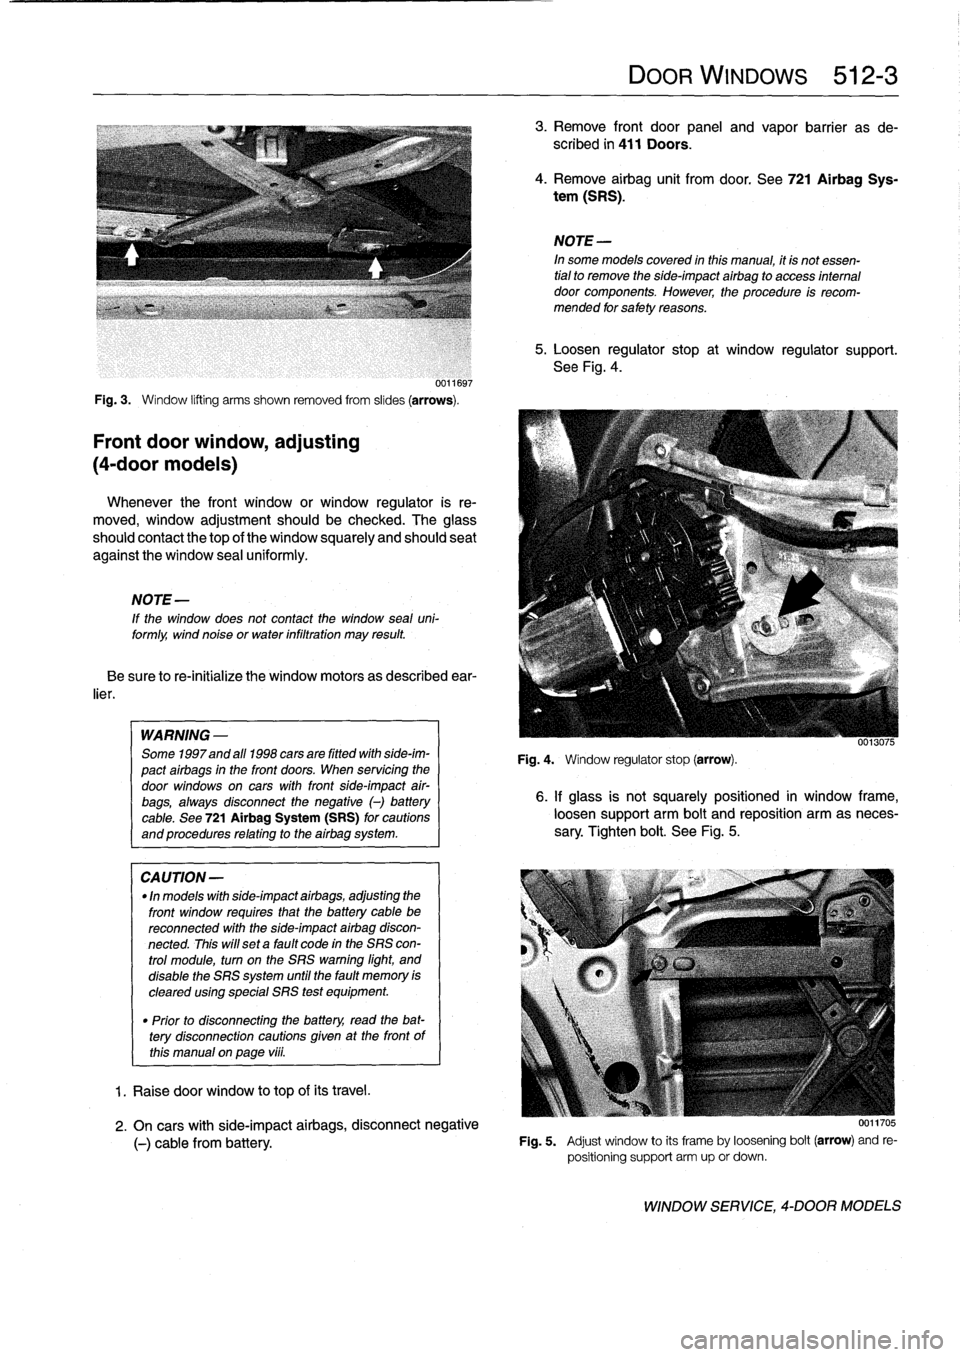 BMW 318i 1998 E36 Workshop Manual 
0011697

Fig
.
3
.

	

Window
lifting
arms
shown
removed
from
slides
(arrows)
.

Front
door
window,
adjusting

(4-door
models)

Whenever
the
front
window
or
window
regulator
is
re-

moved,
window
adj